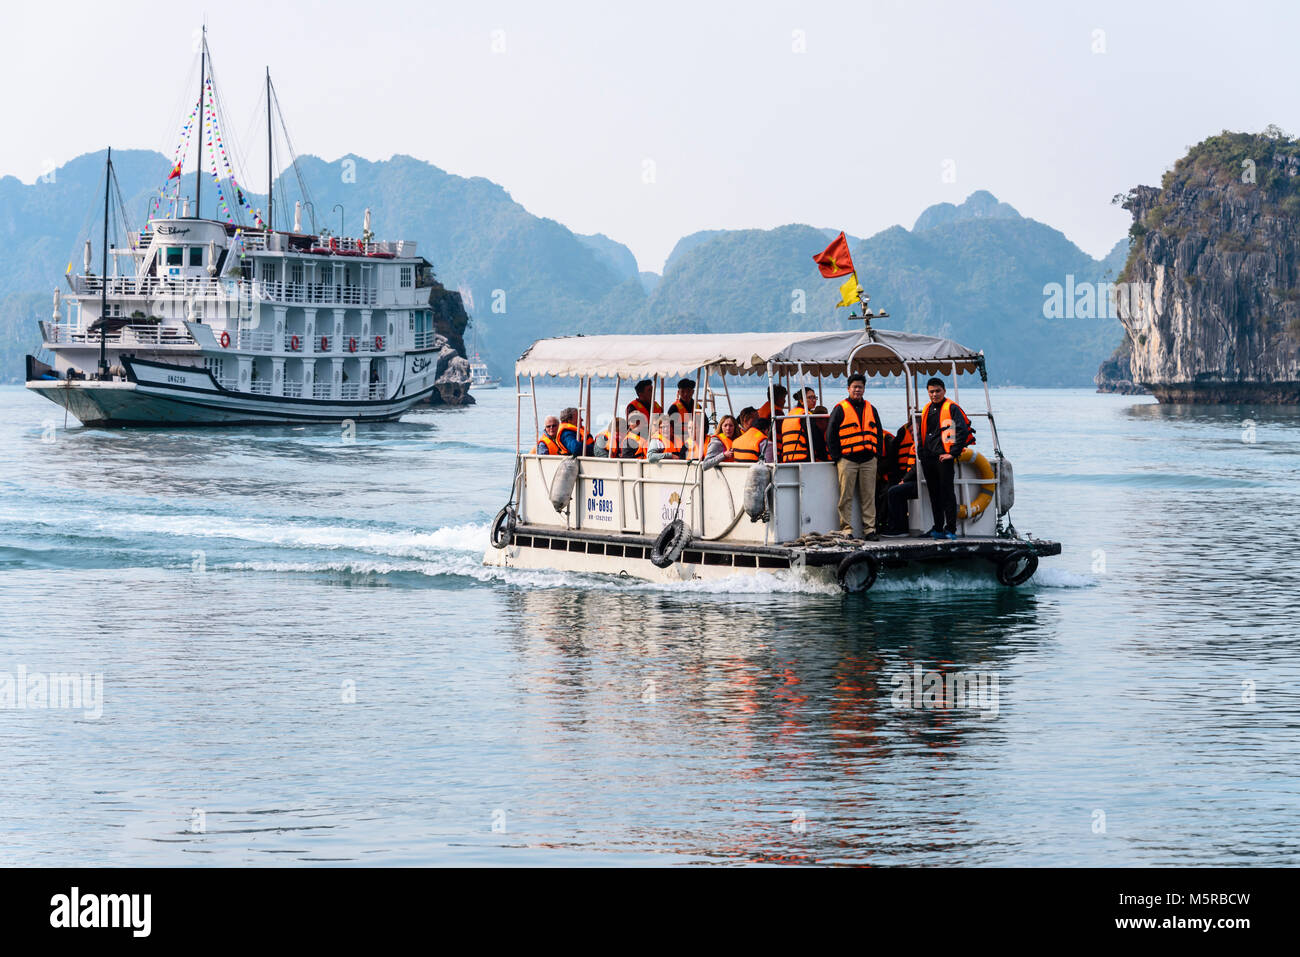 Tourists wearing orange life jackets are taken from their cruise ship in a tender to the Cua Van floating village, Halong Bay, Vietnam Stock Photo